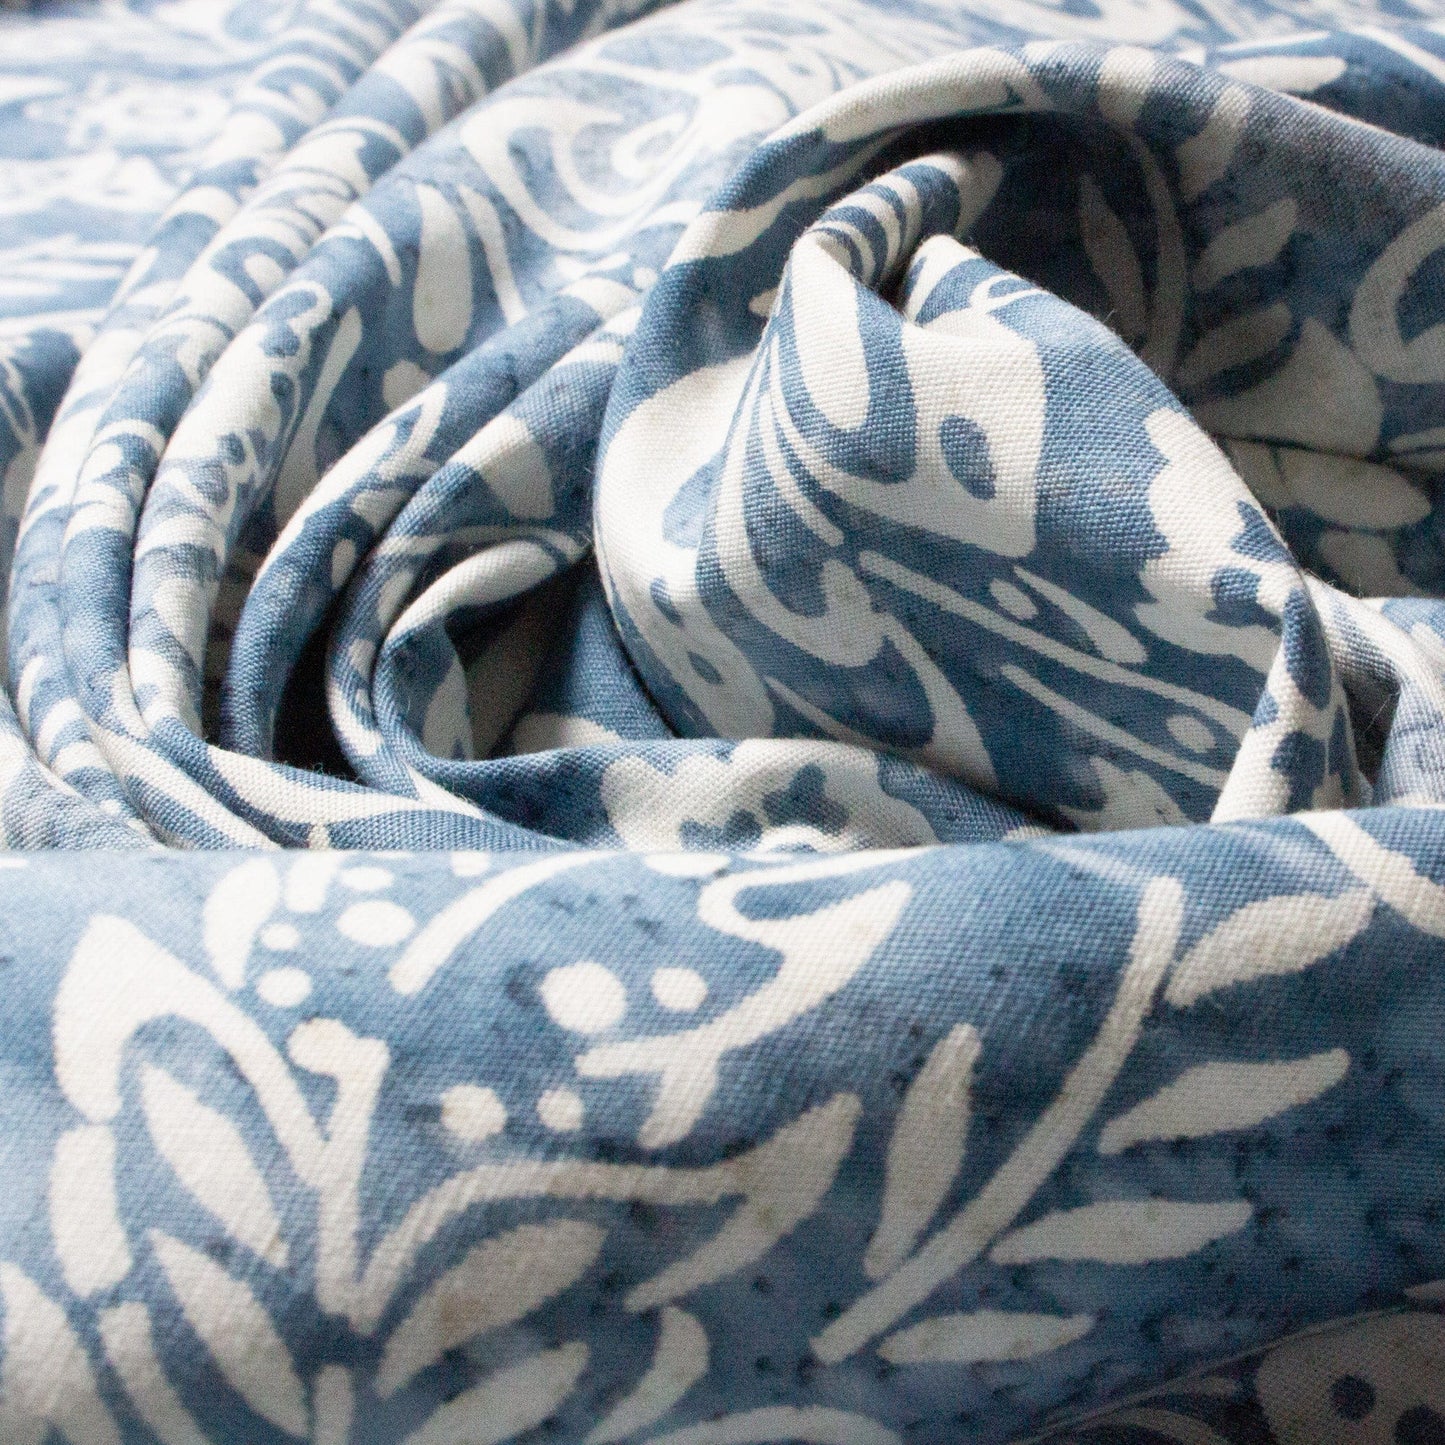 Hand Dyed Cotton Batik with Blue and White Floral Design